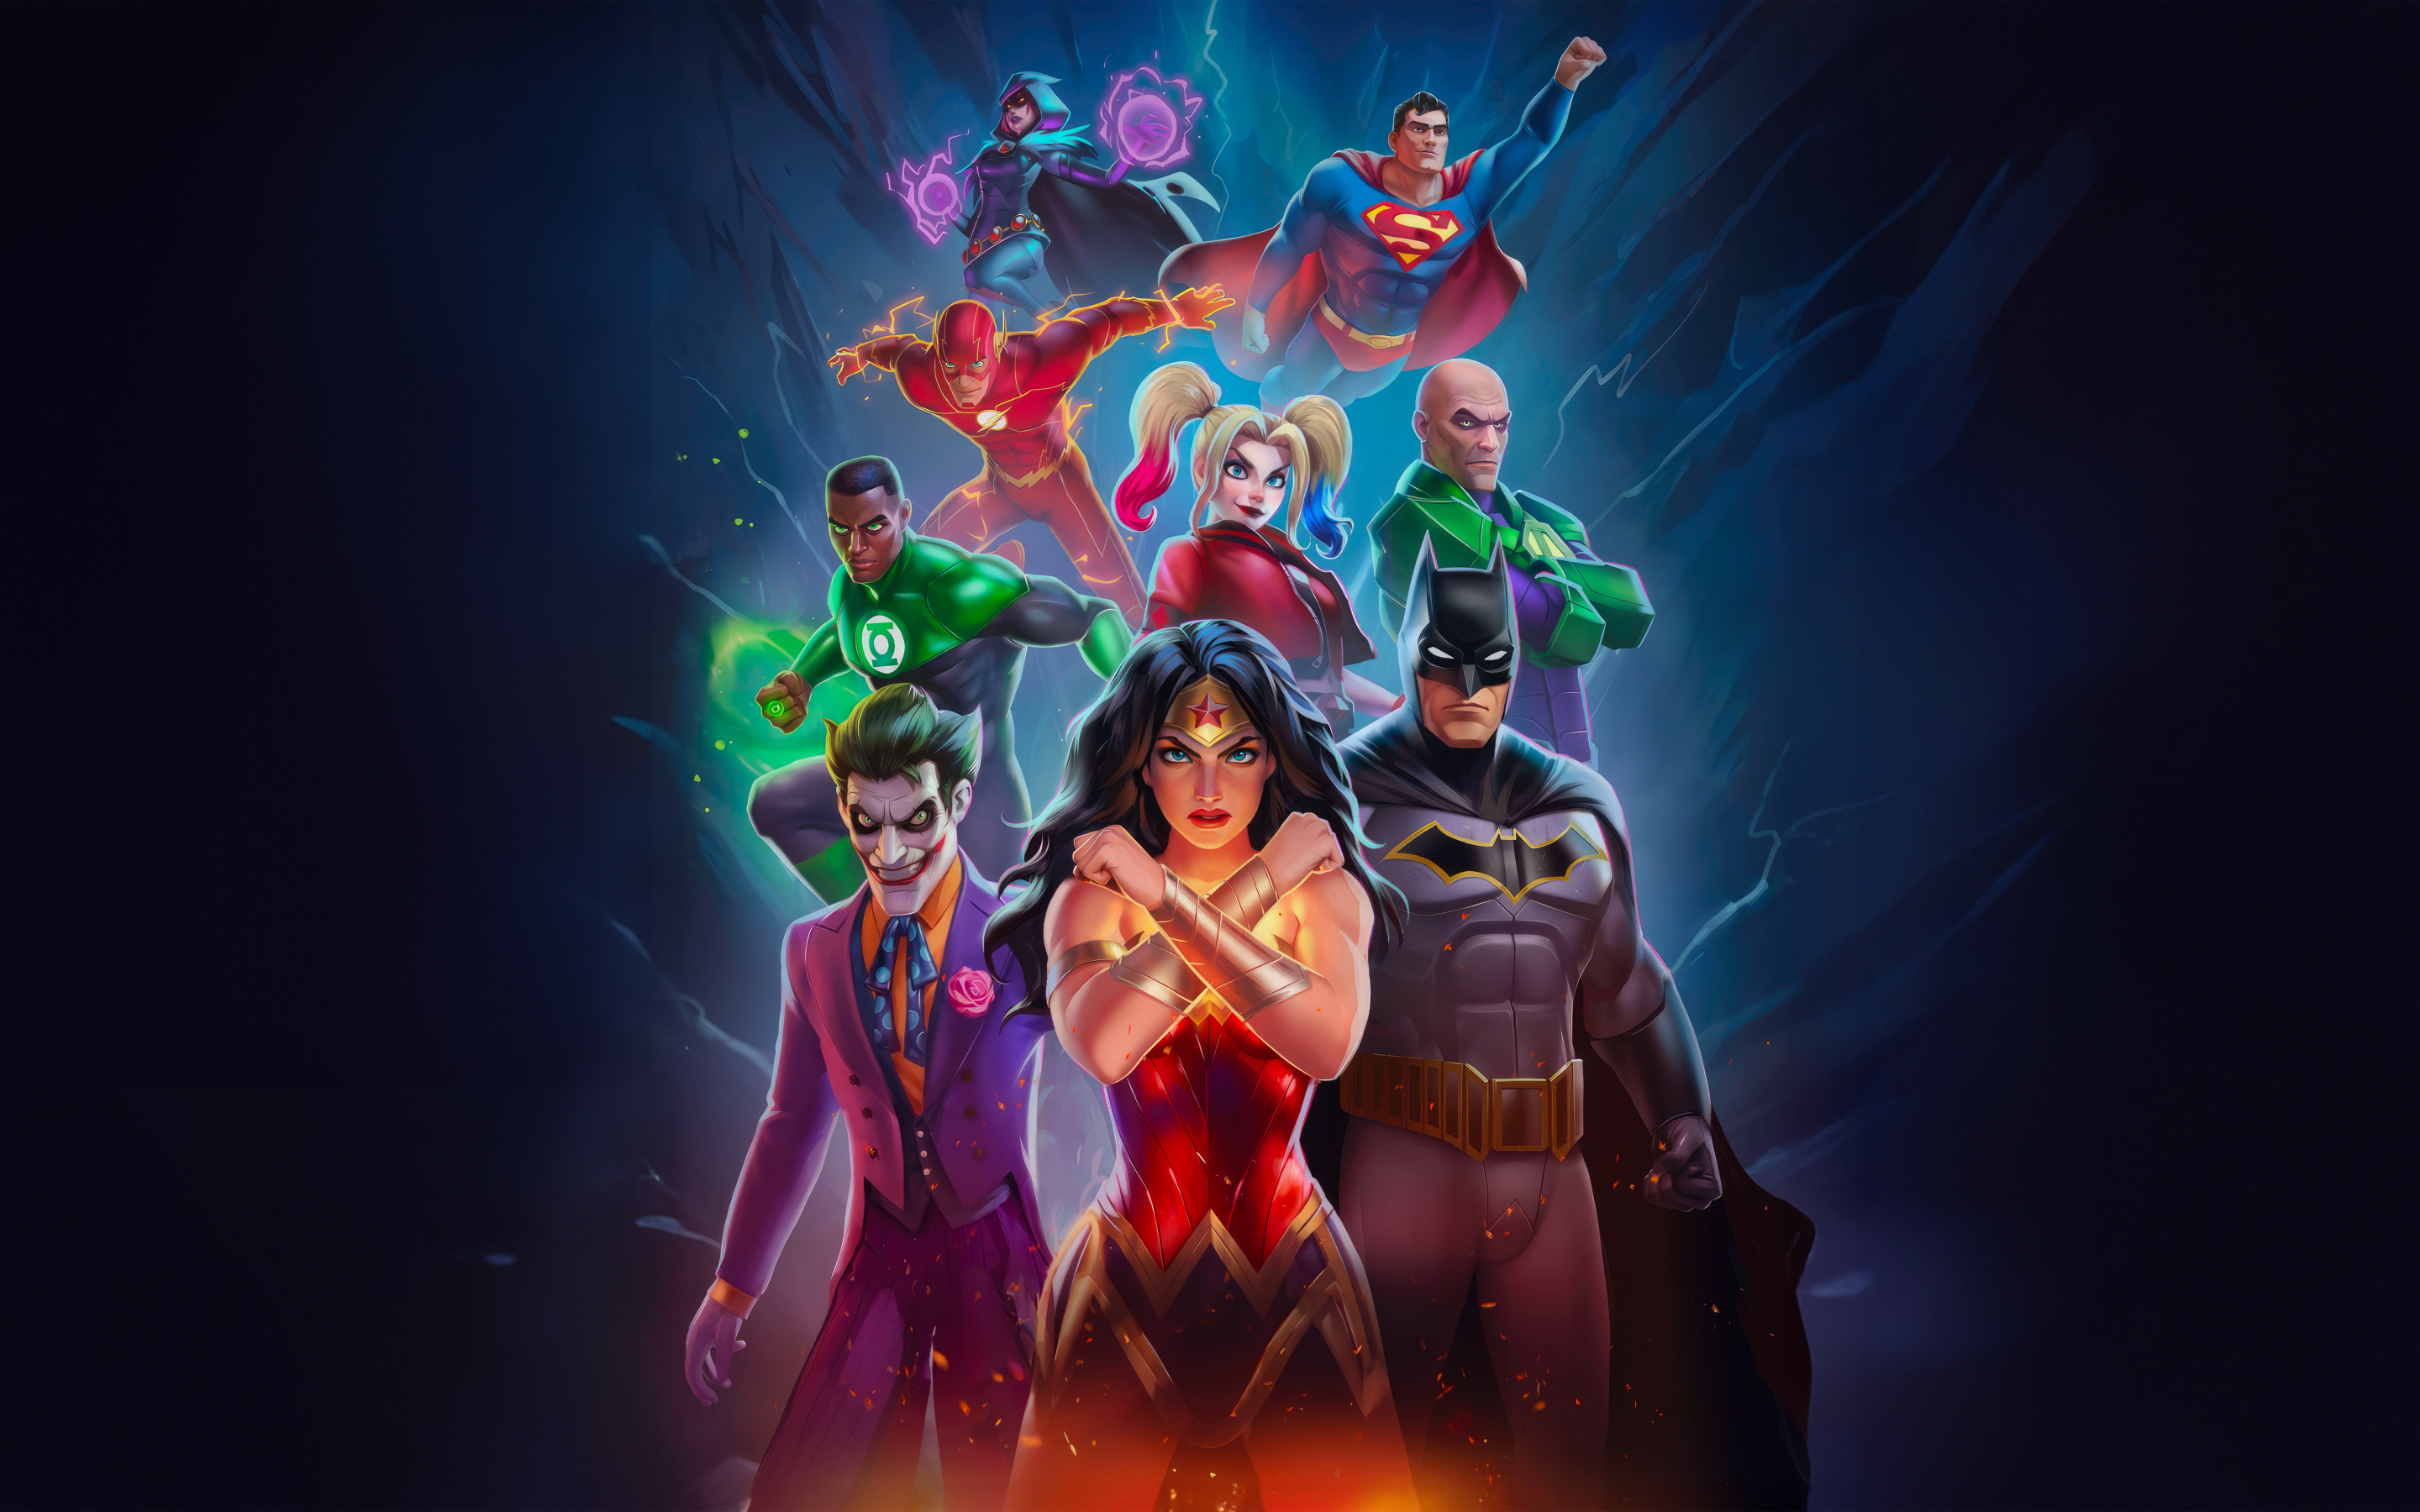 DC heroes and villains, Justice league, animated show, 2880x1800 wallpaper